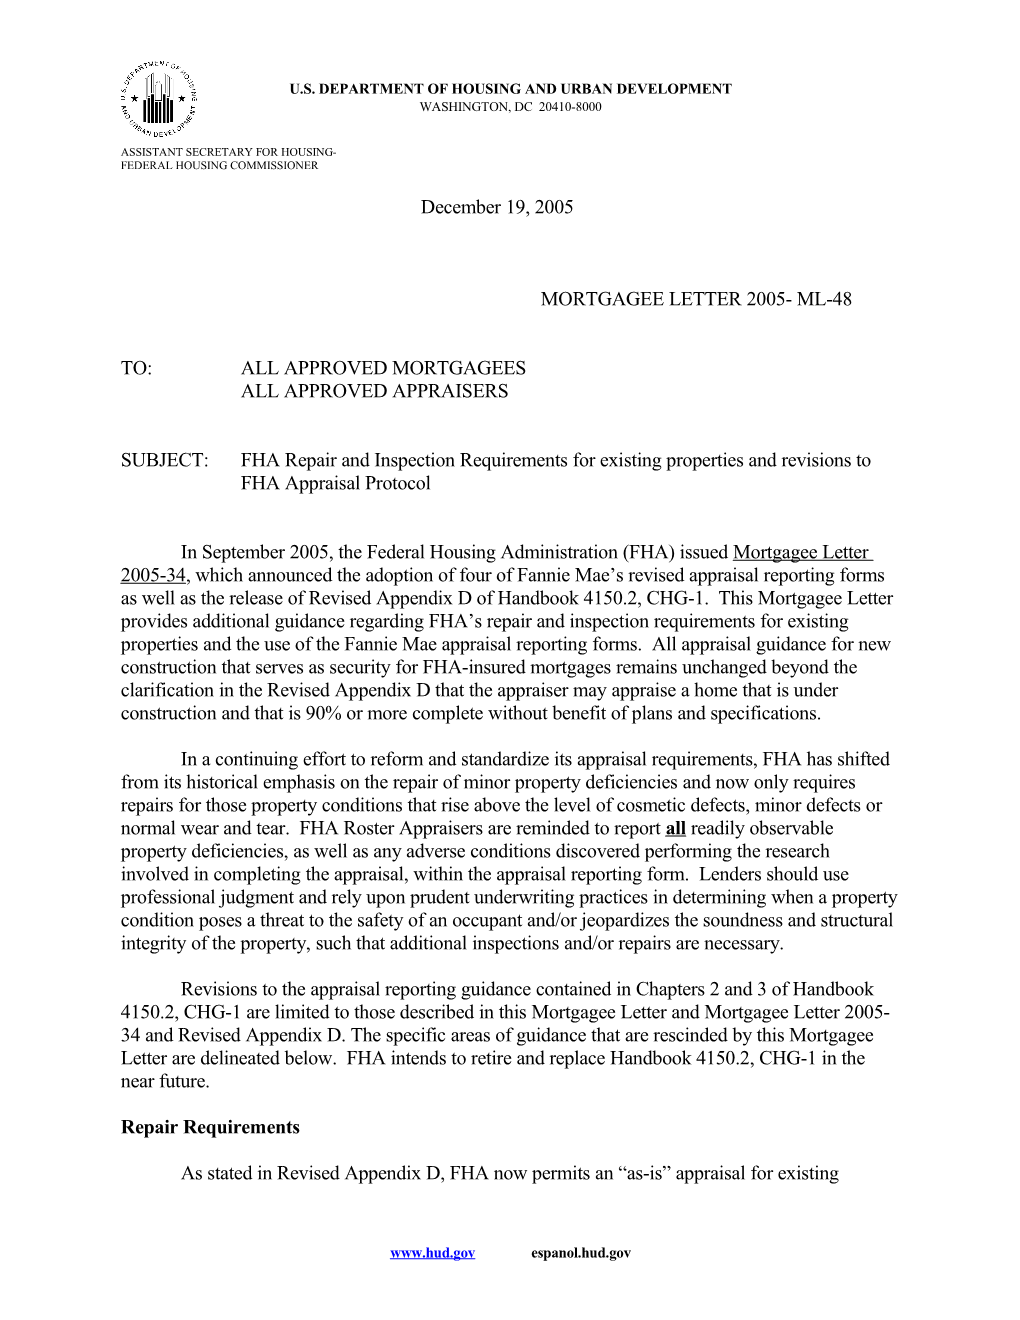 Mortgagee Letter 2005- Ml-48